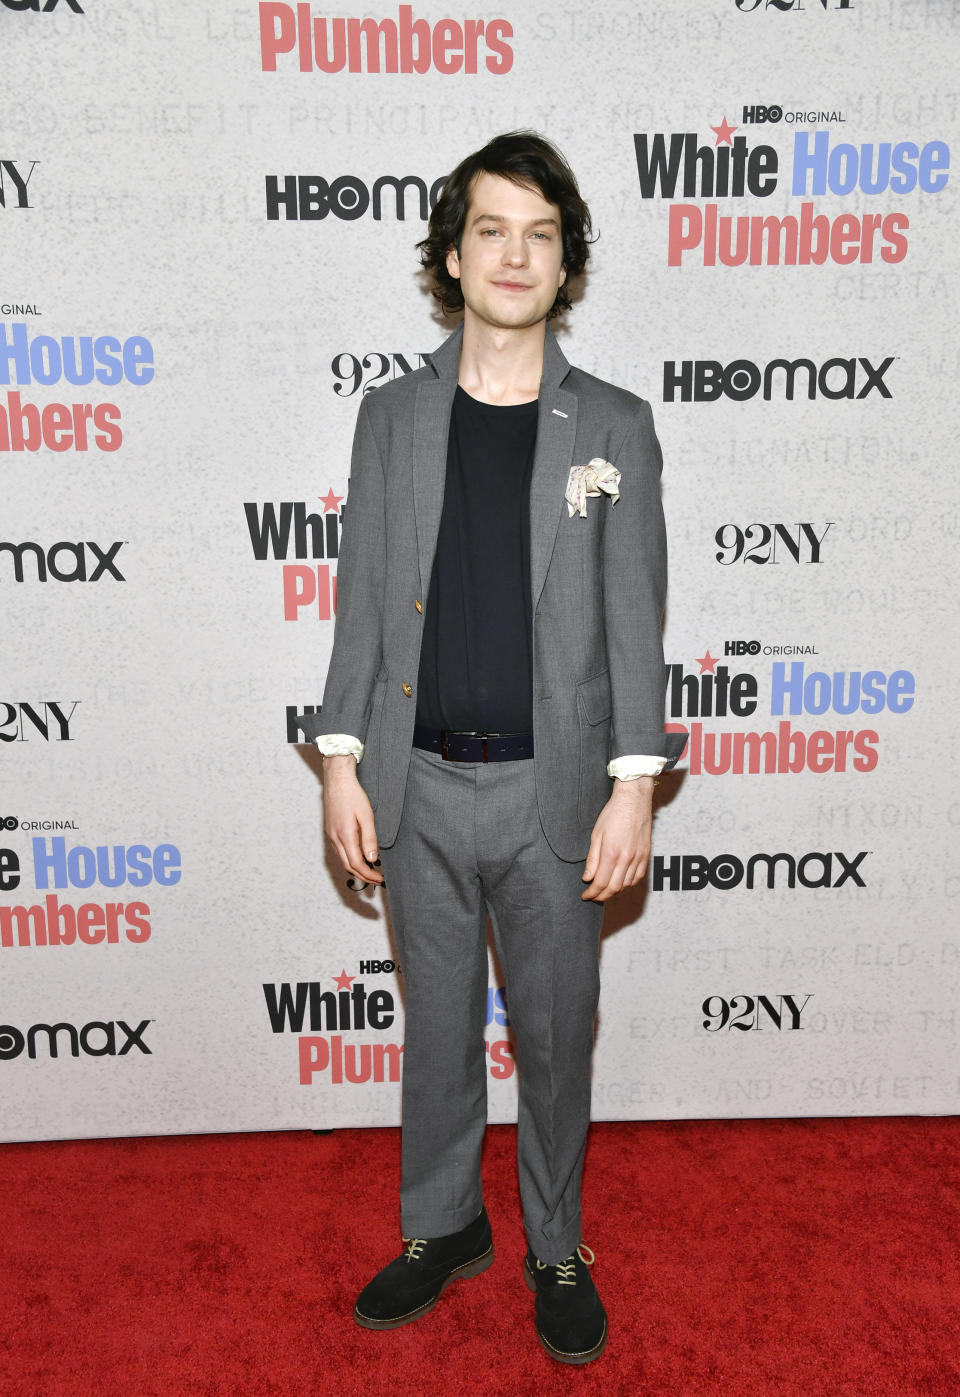 Liam James attends the premiere of HBO's "White House Plumbers," at the 92nd Street Y, Monday, April 17, 2023, in New York. (Photo by Evan Agostini/Invision/AP)